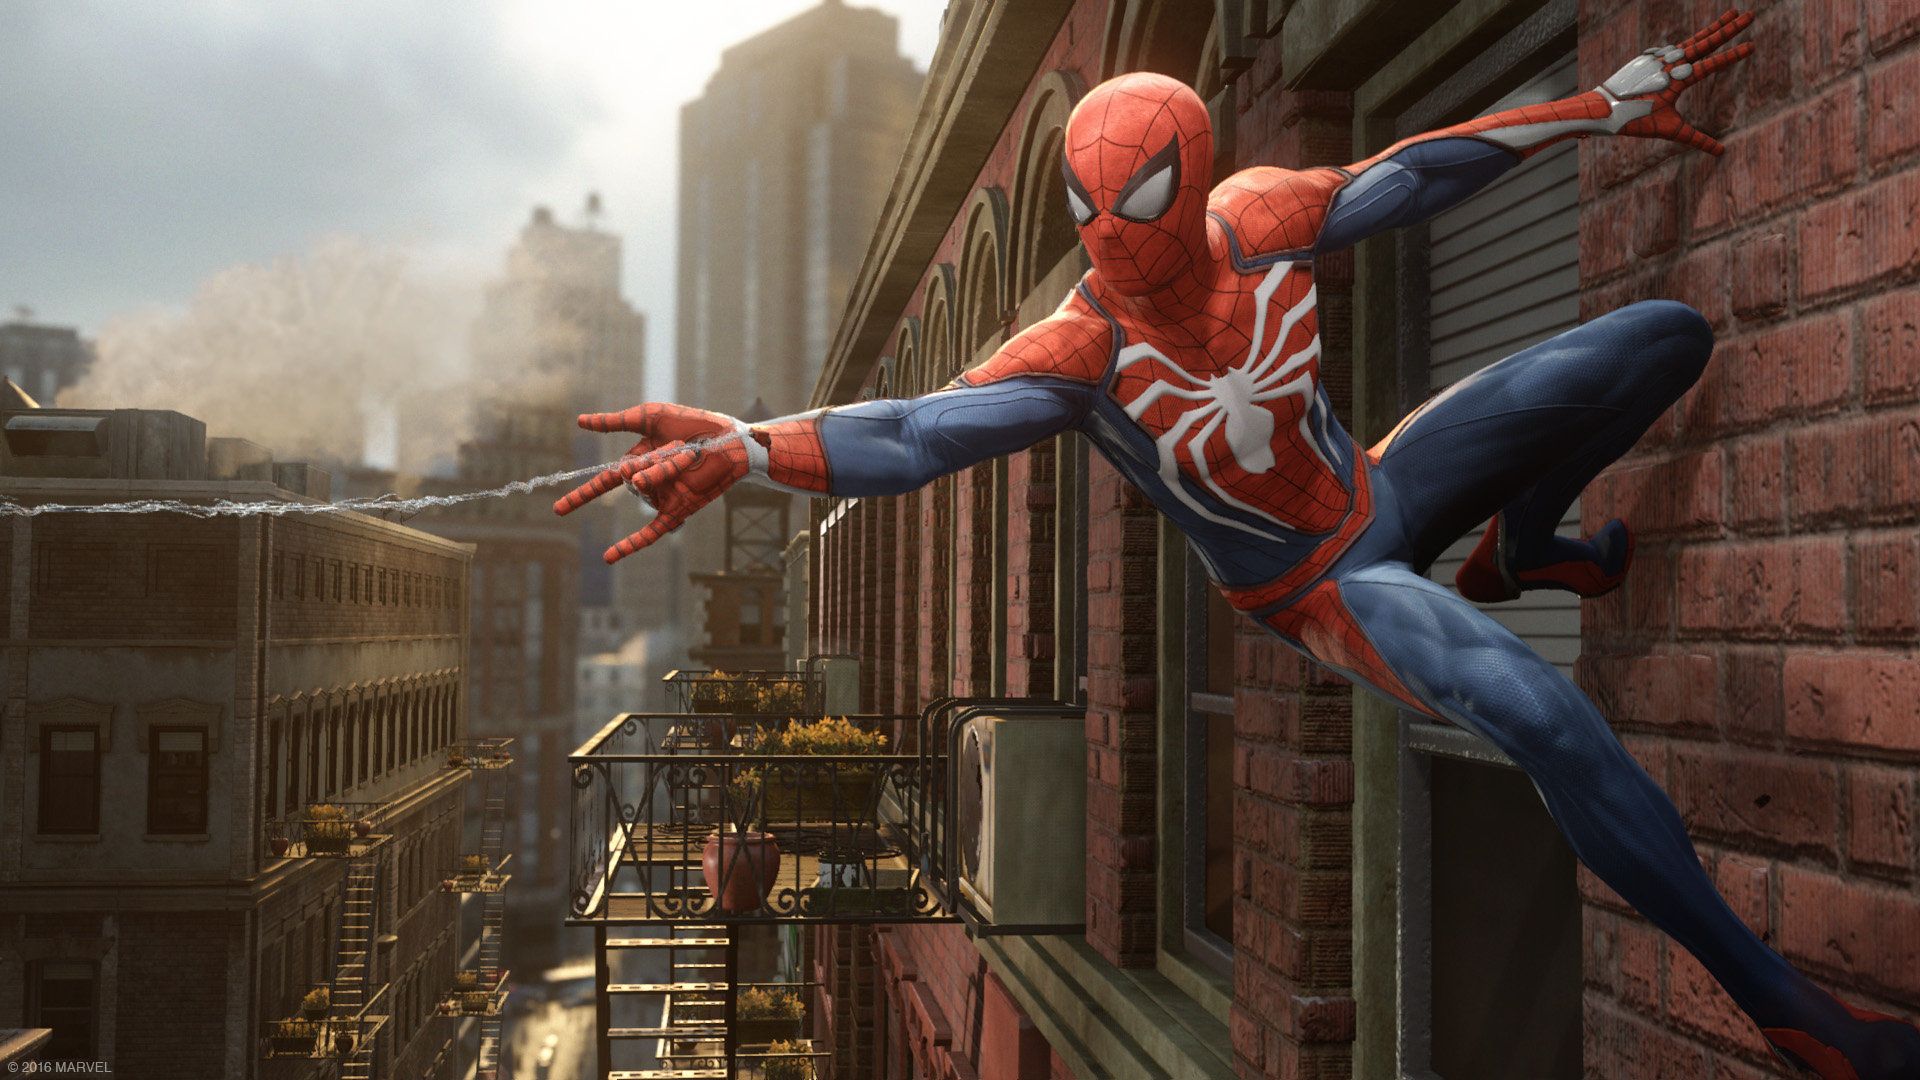 spider-man-ps4-game